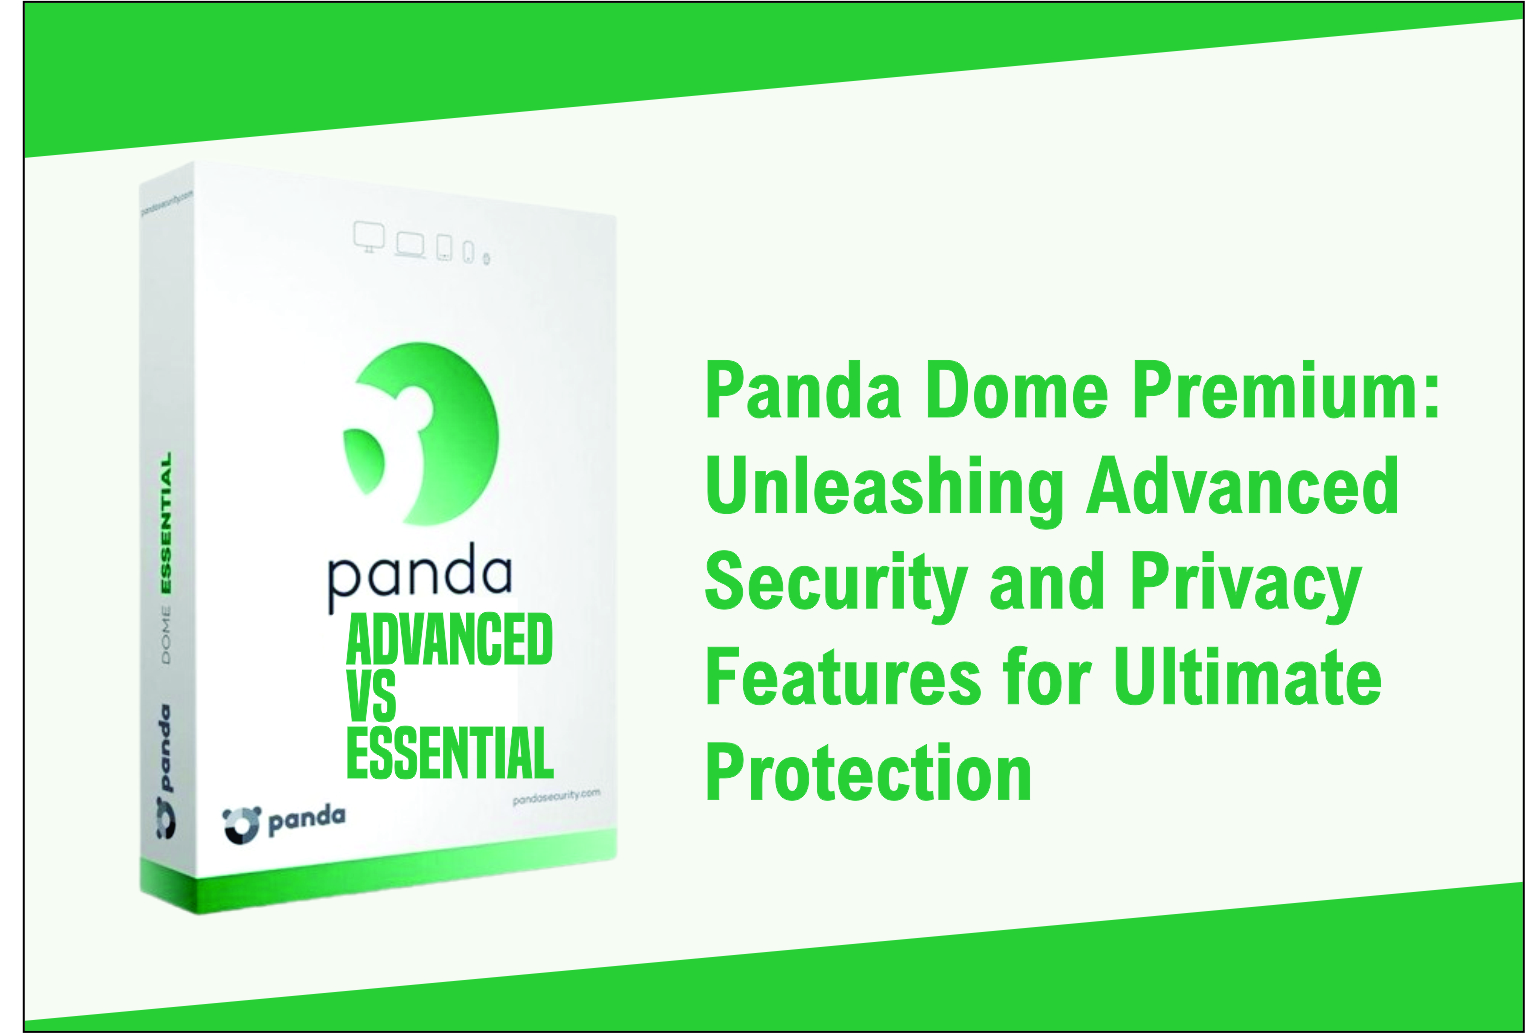 Panda Dome Premium: Unleashing Advanced Security and Privacy Features for Ultimate Protection